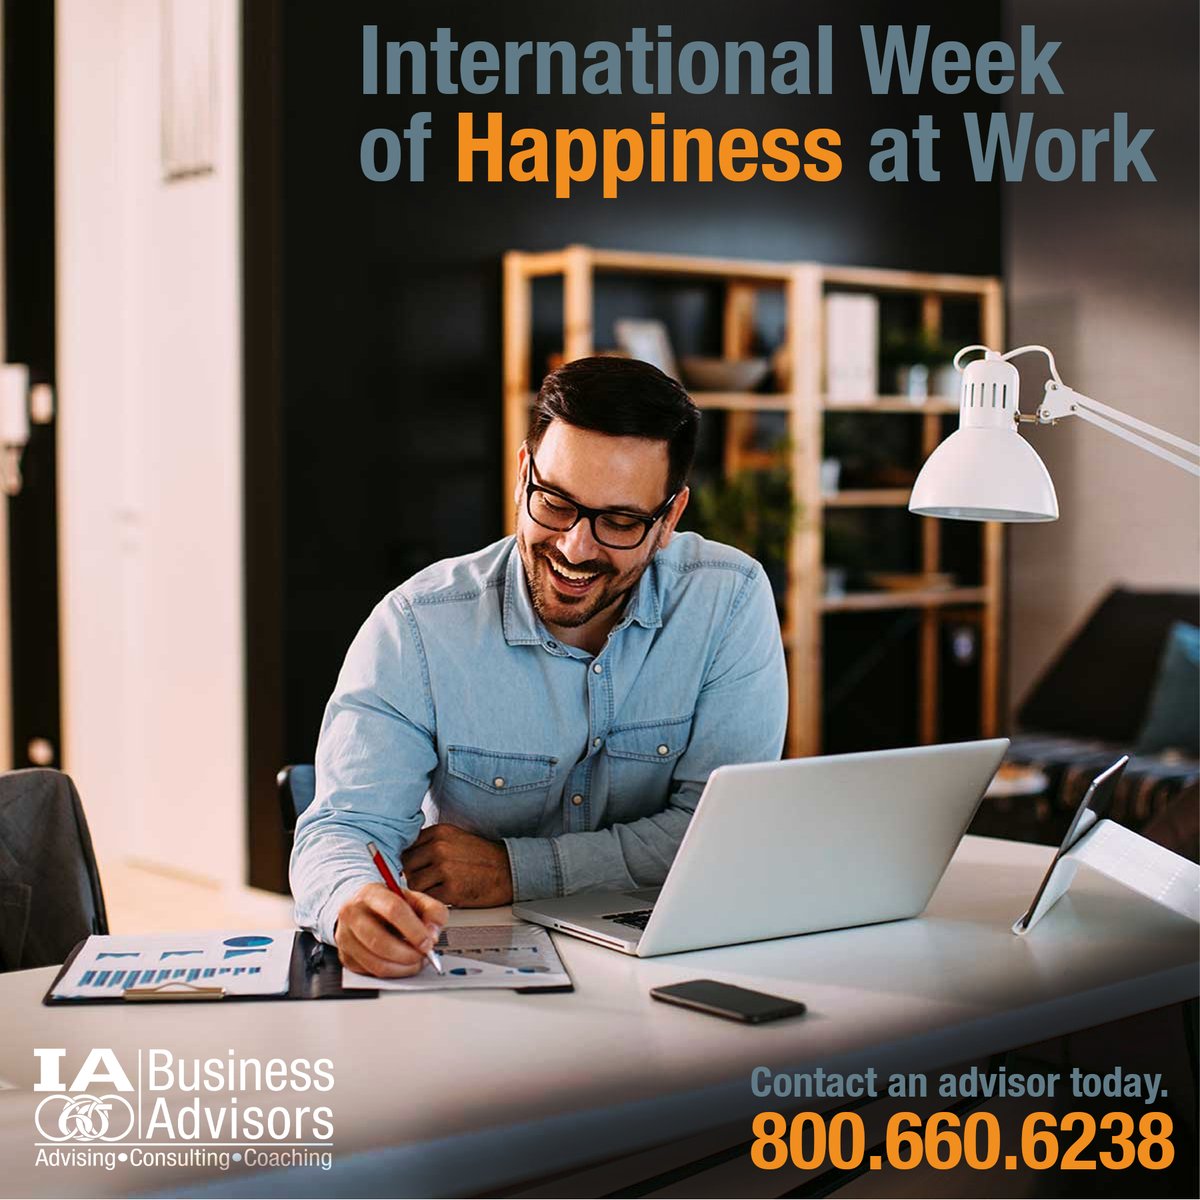 This public initiative helps raise awareness to improving employee happiness at work. Create a company culture that can make your team happy to be at work.
#internationalweekofhappinessatwork #positivecompanyculture  #IABusinessAdvisors #advisors #business #people #process